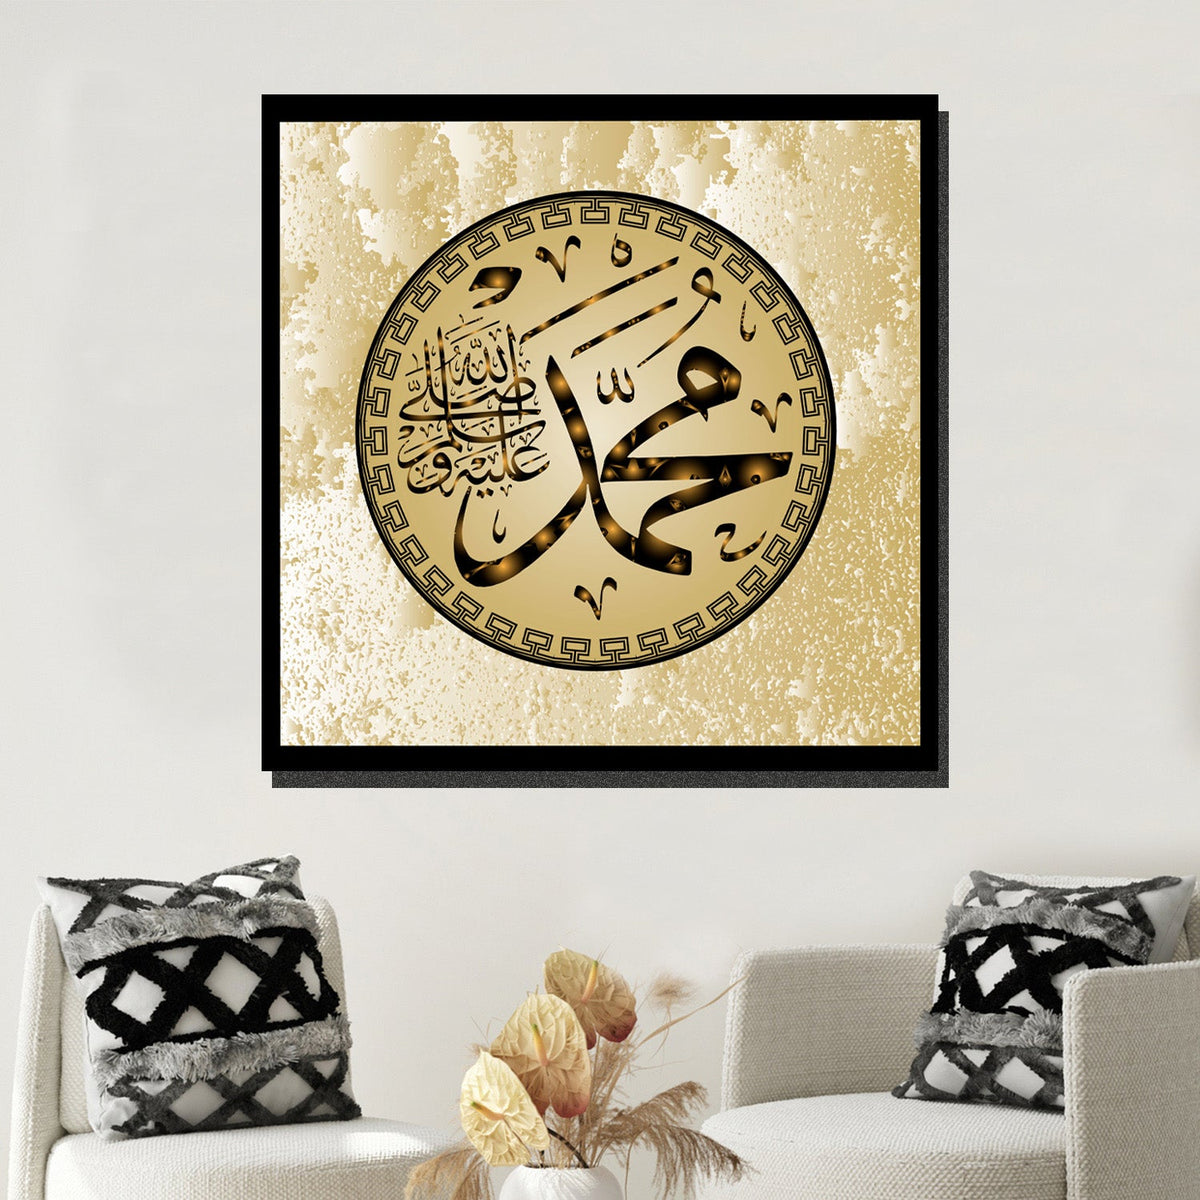 https://cdn.shopify.com/s/files/1/0387/9986/8044/products/IslamicArtLimitedEdition7CanvasArtprintStretched-2.jpg